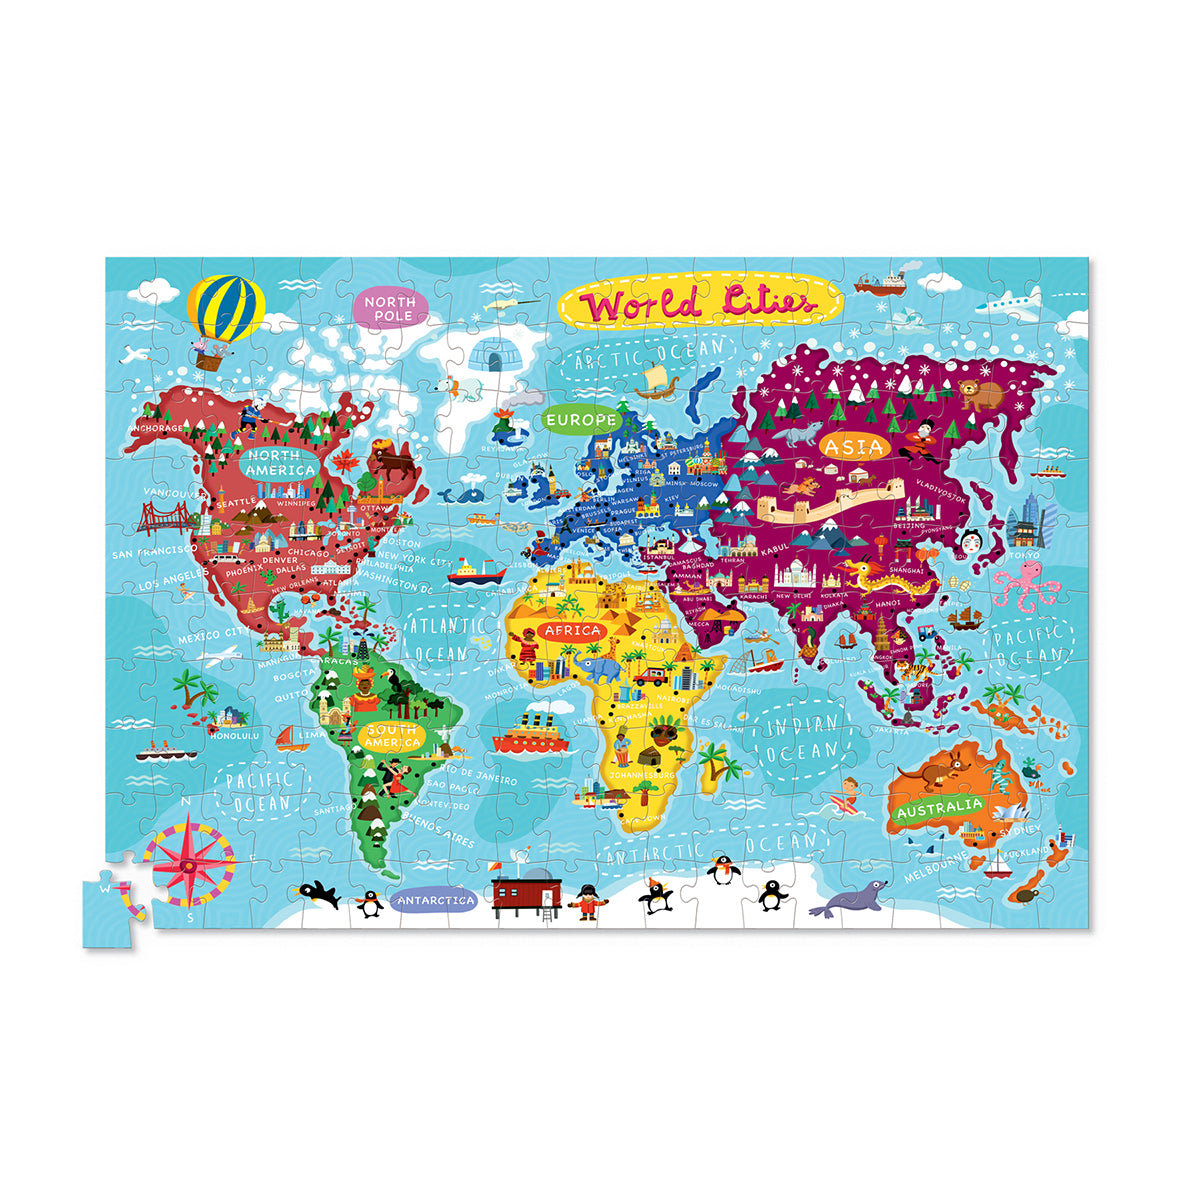 200-Piece Puzzle + Poster - World Cities